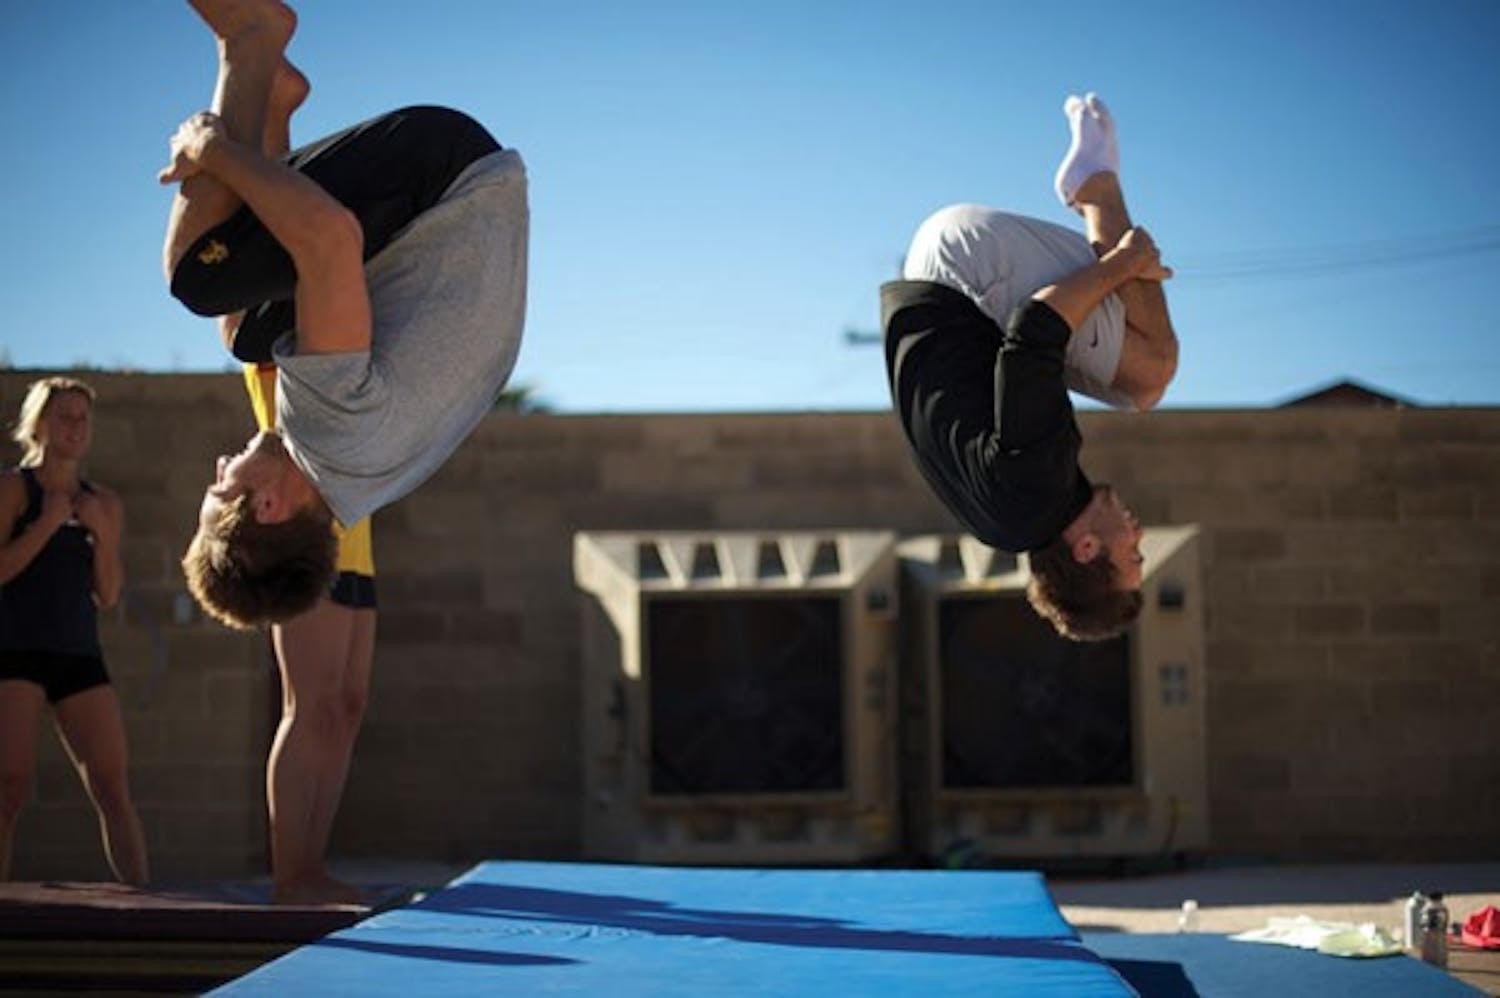 Riley McCormick (left) and Cameron Bradshaw of the ASU diving team train on a trampoline during a Jan. 13, 2011 practice. (Photo by Michael Arellano)